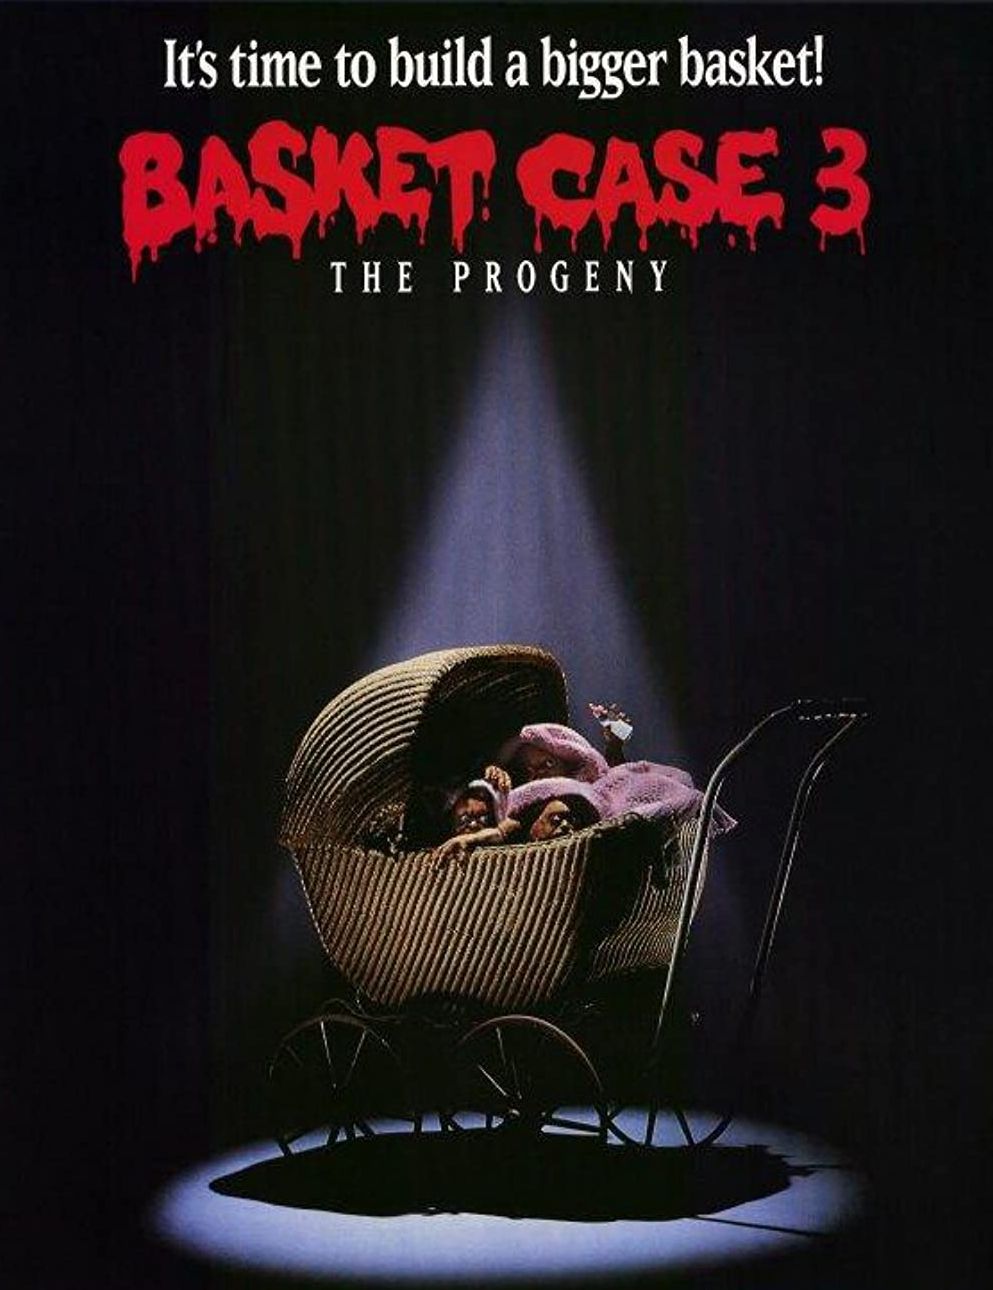 It's Time For A Bigger Basket - Basket Case 3 The Progeny Released in 1991